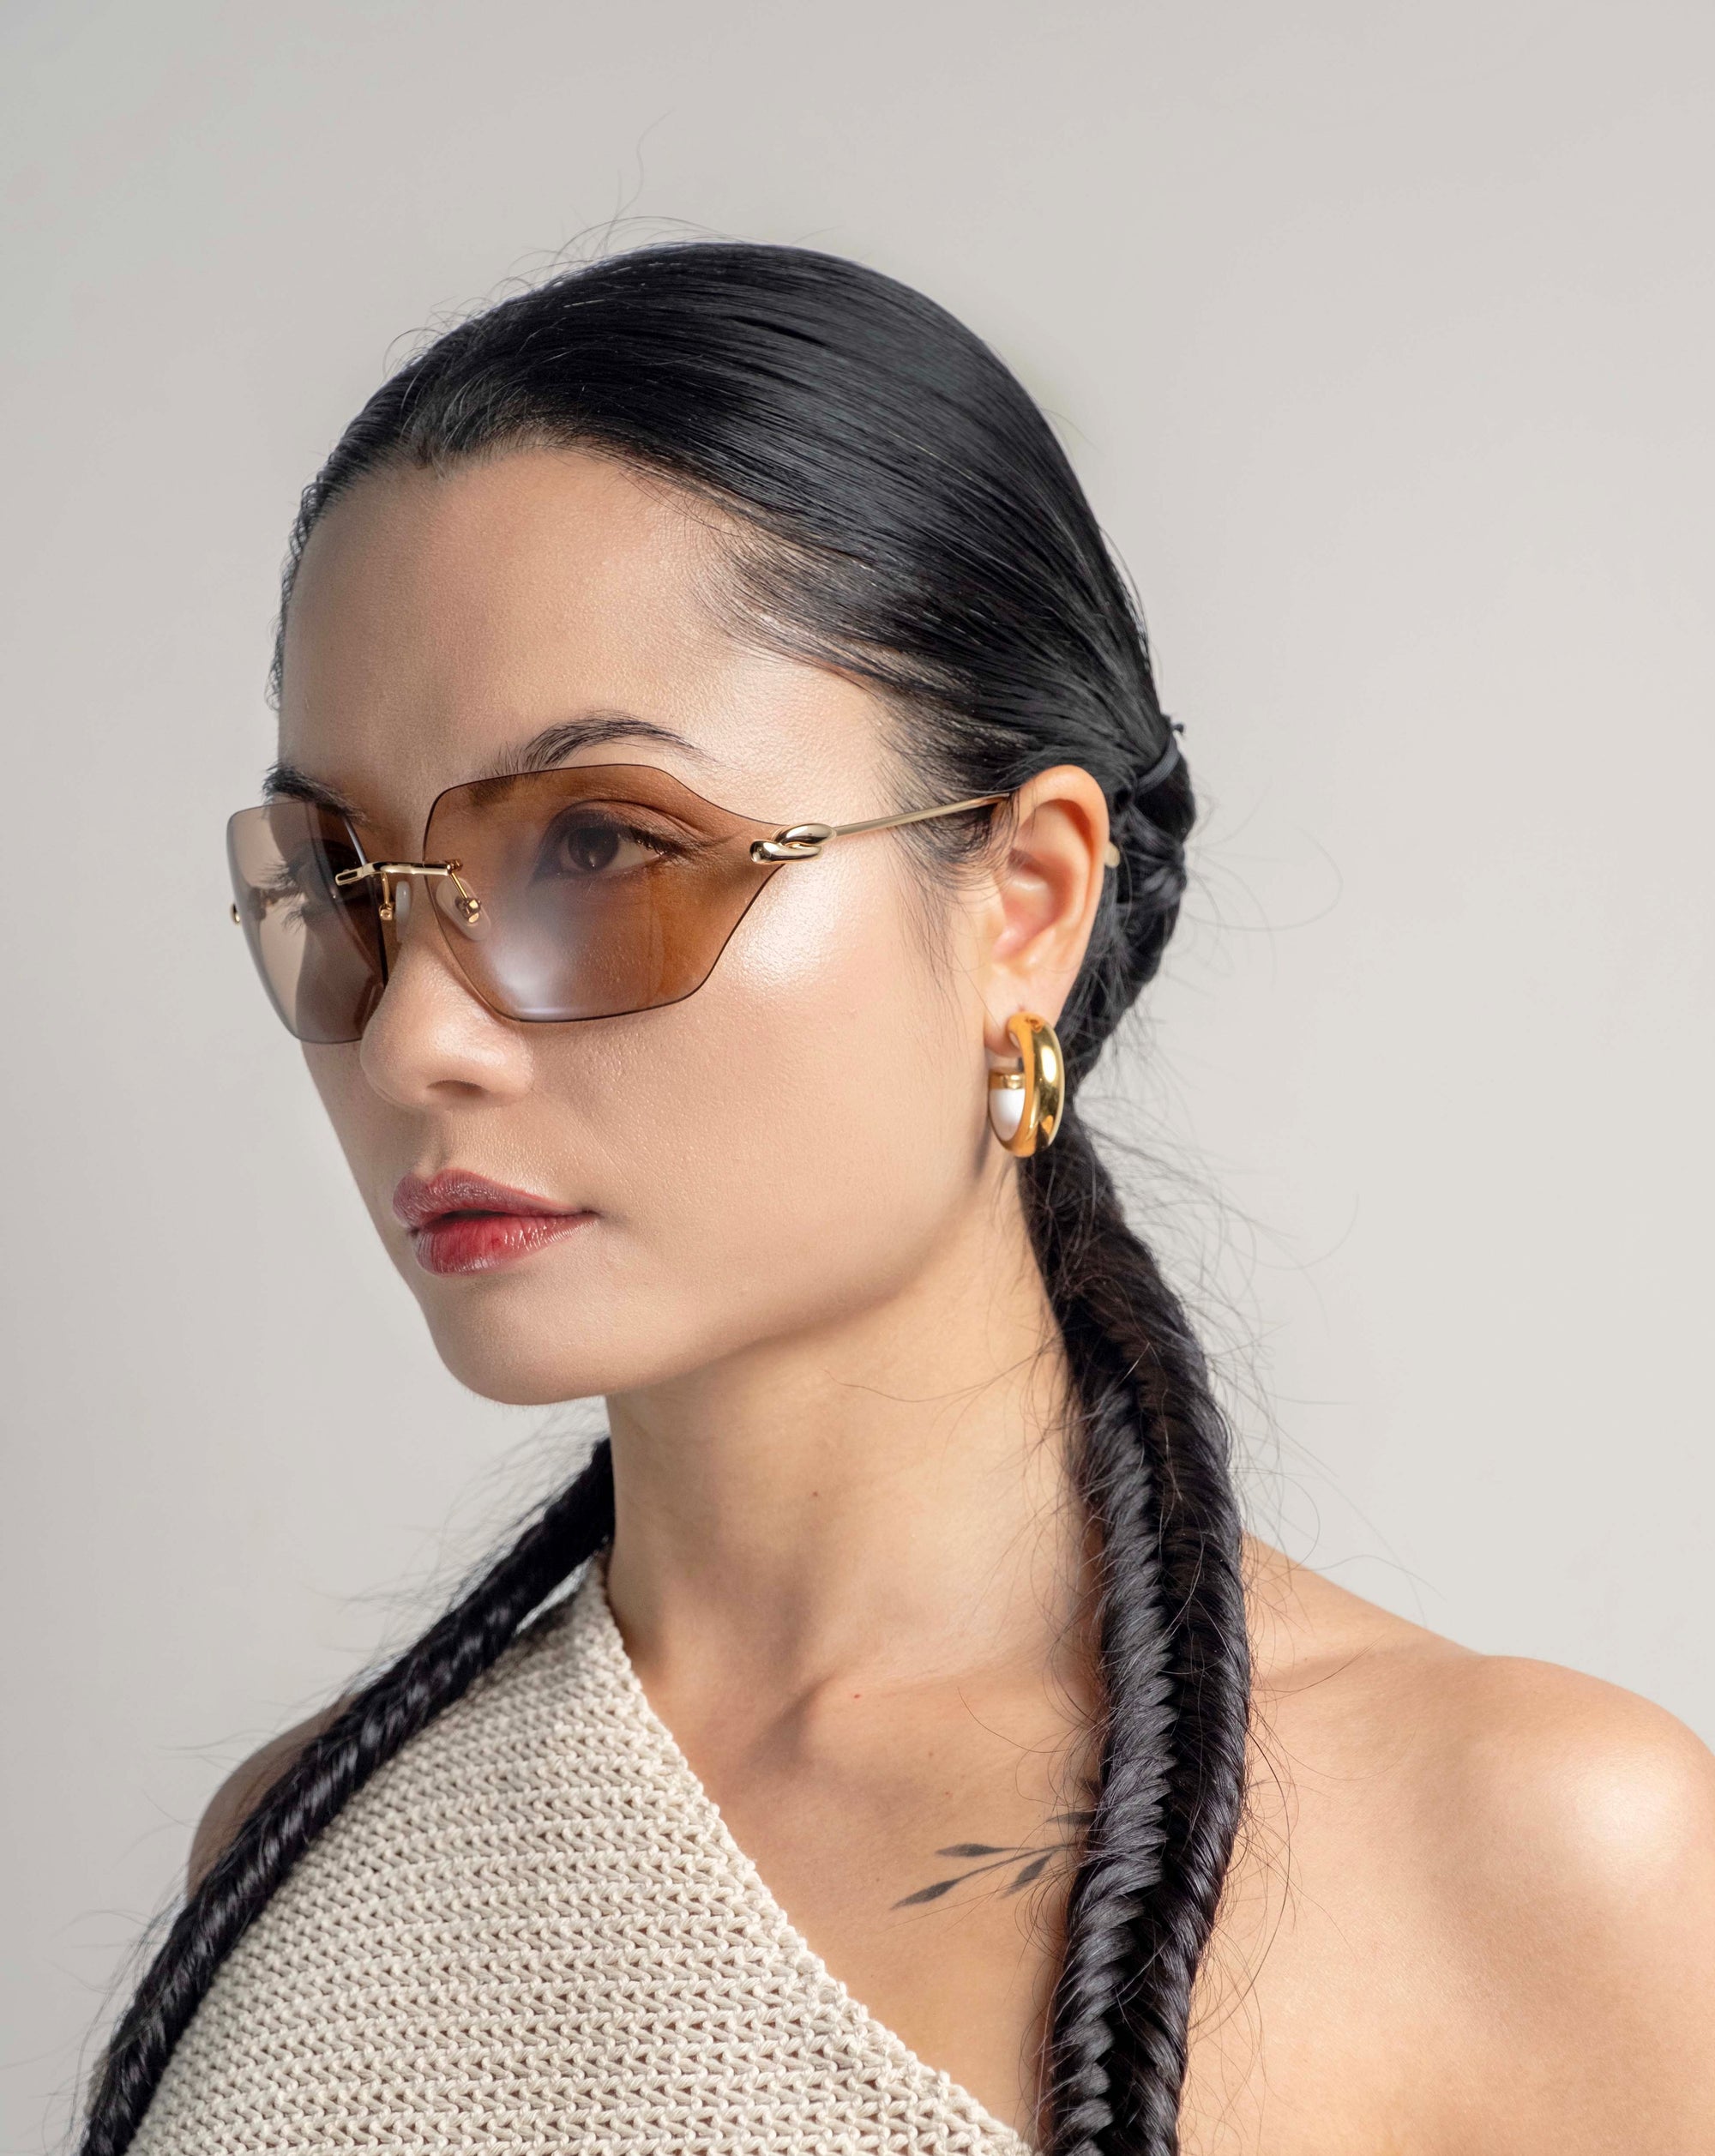 A woman with sleek dark hair fashioned into two braids, wearing For Art&#39;s Sake® Serpent II sunglasses with 18-karat gold plating and gold hoop earrings. She is dressed in a white, one-shoulder top and is gazing to the side against a plain background. A small tattoo is visible on her shoulder.